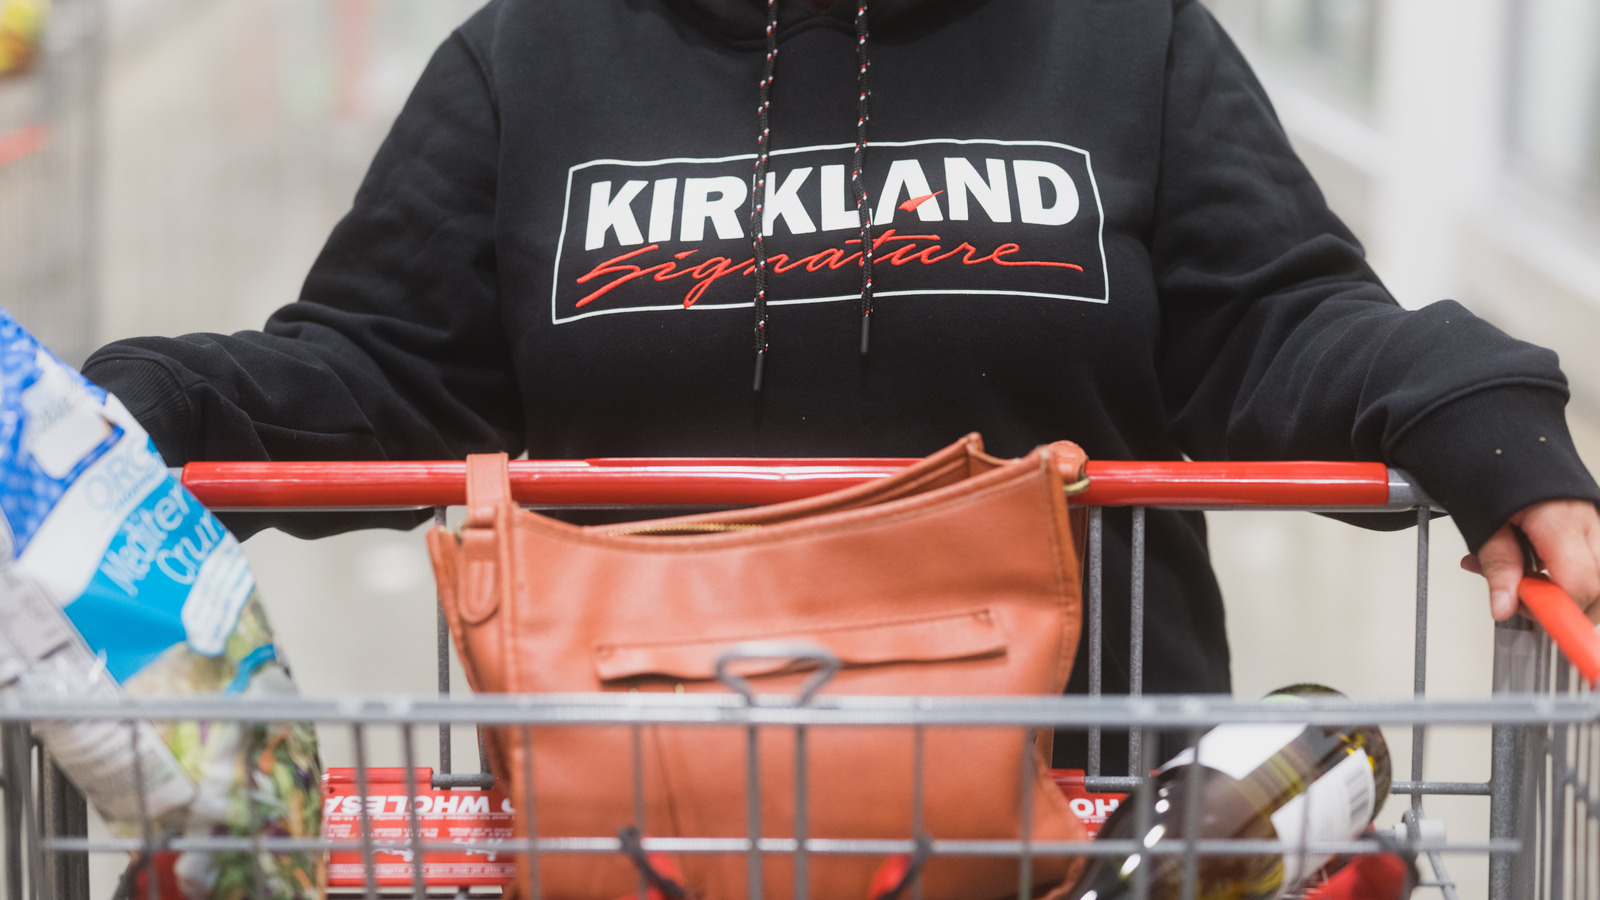 9 Critical Things To Know Before You Use Costco Same-Day Delivery